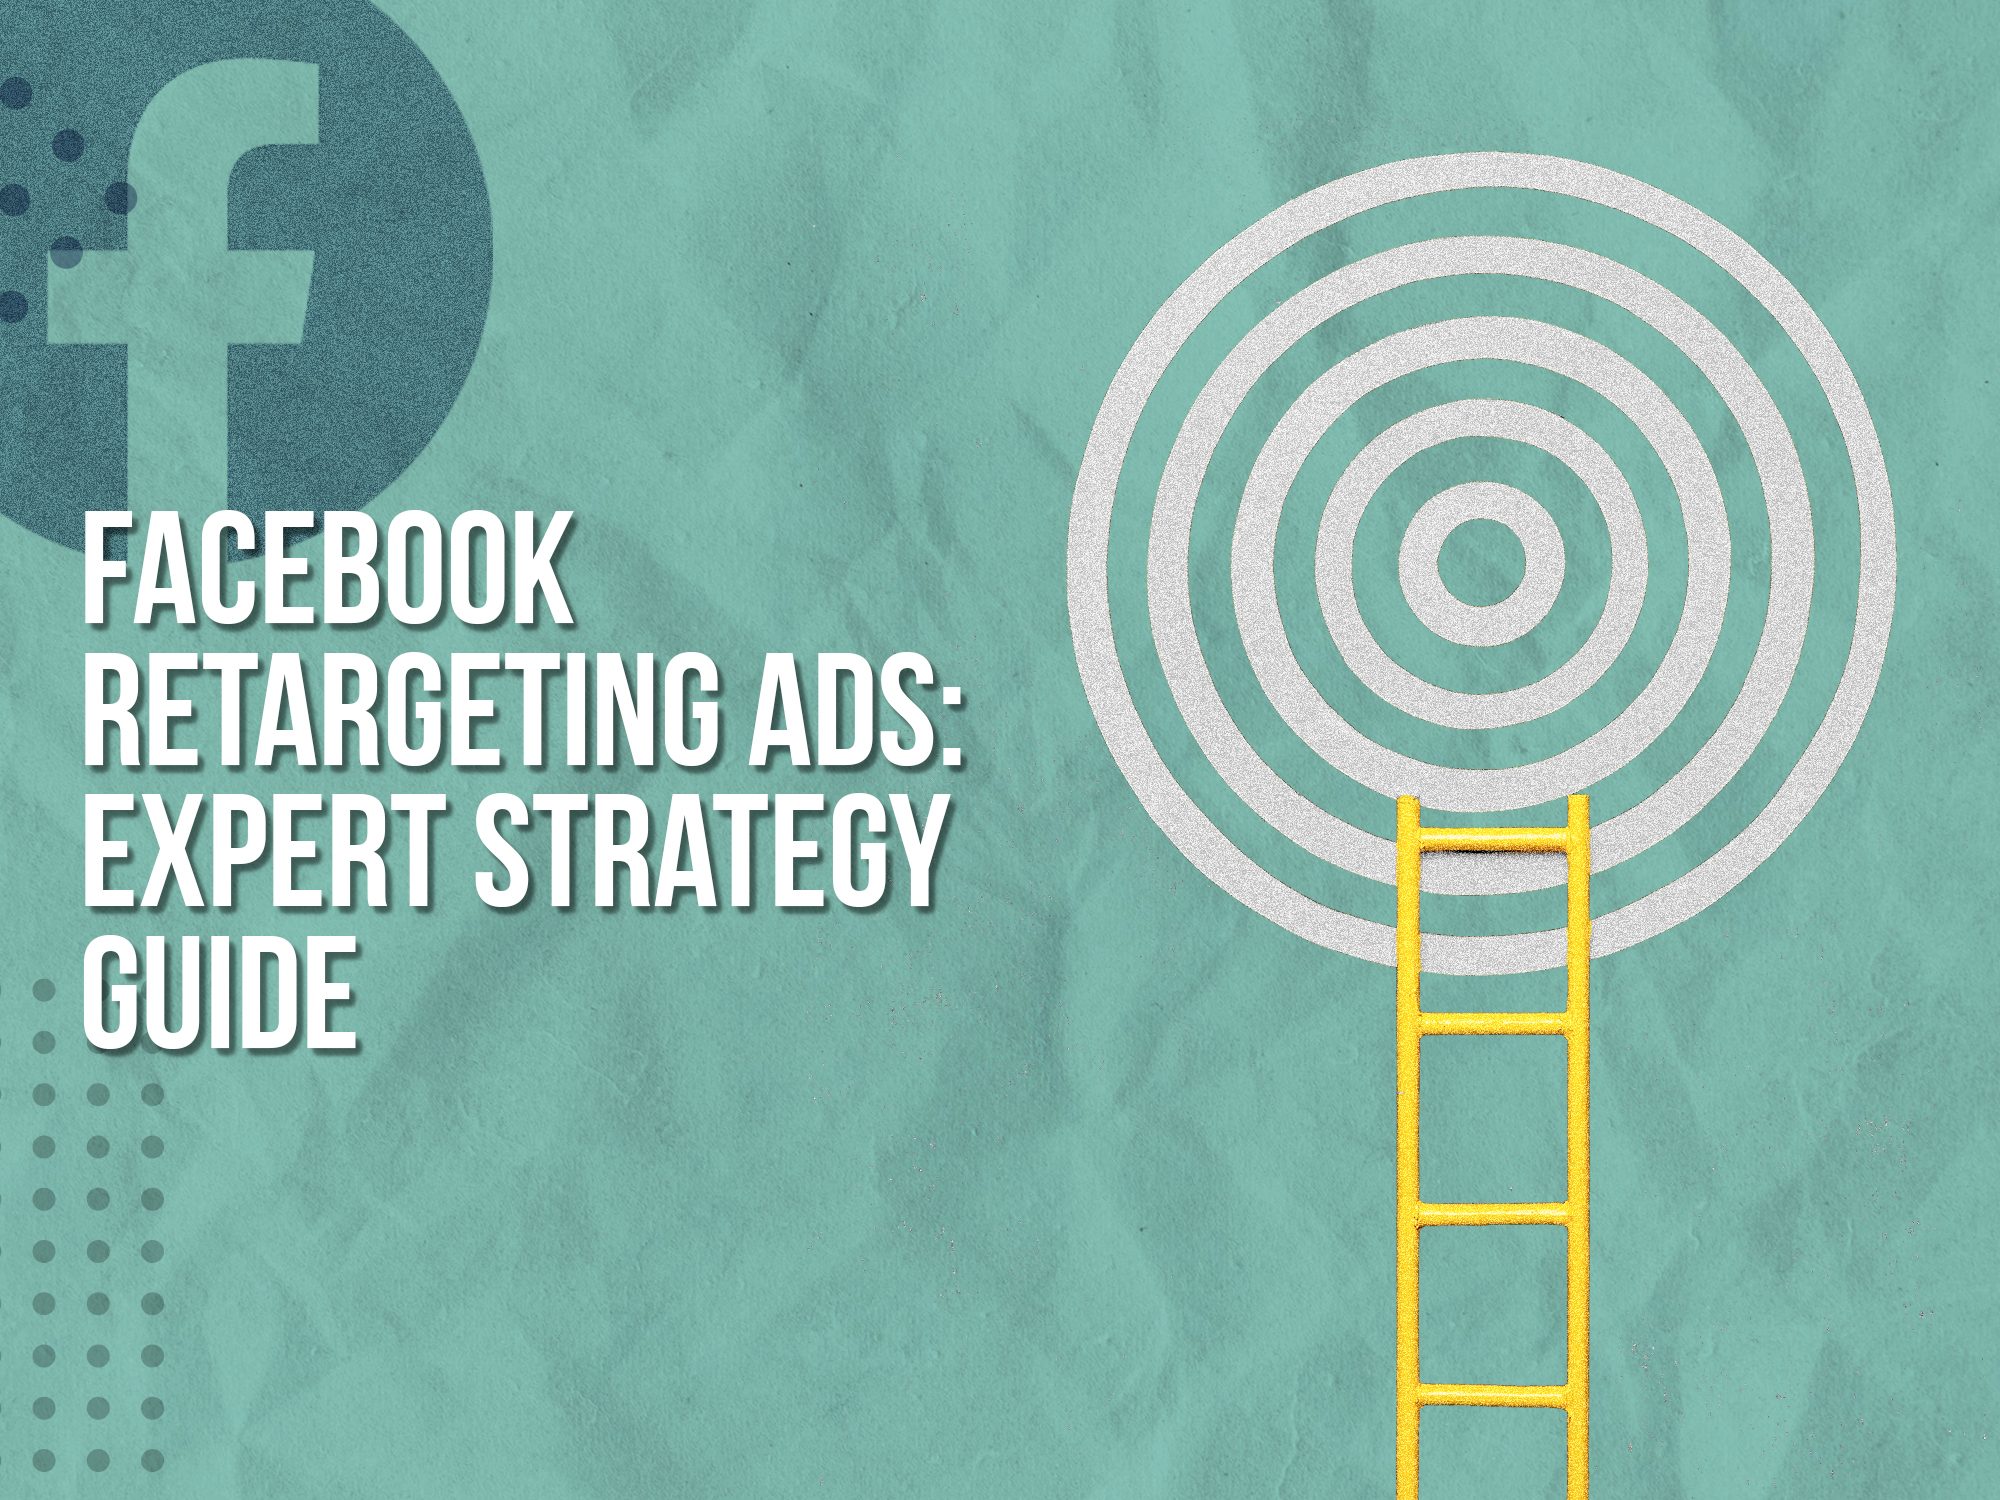 Facebook Retargeting Ads: Expert Strategy Guide